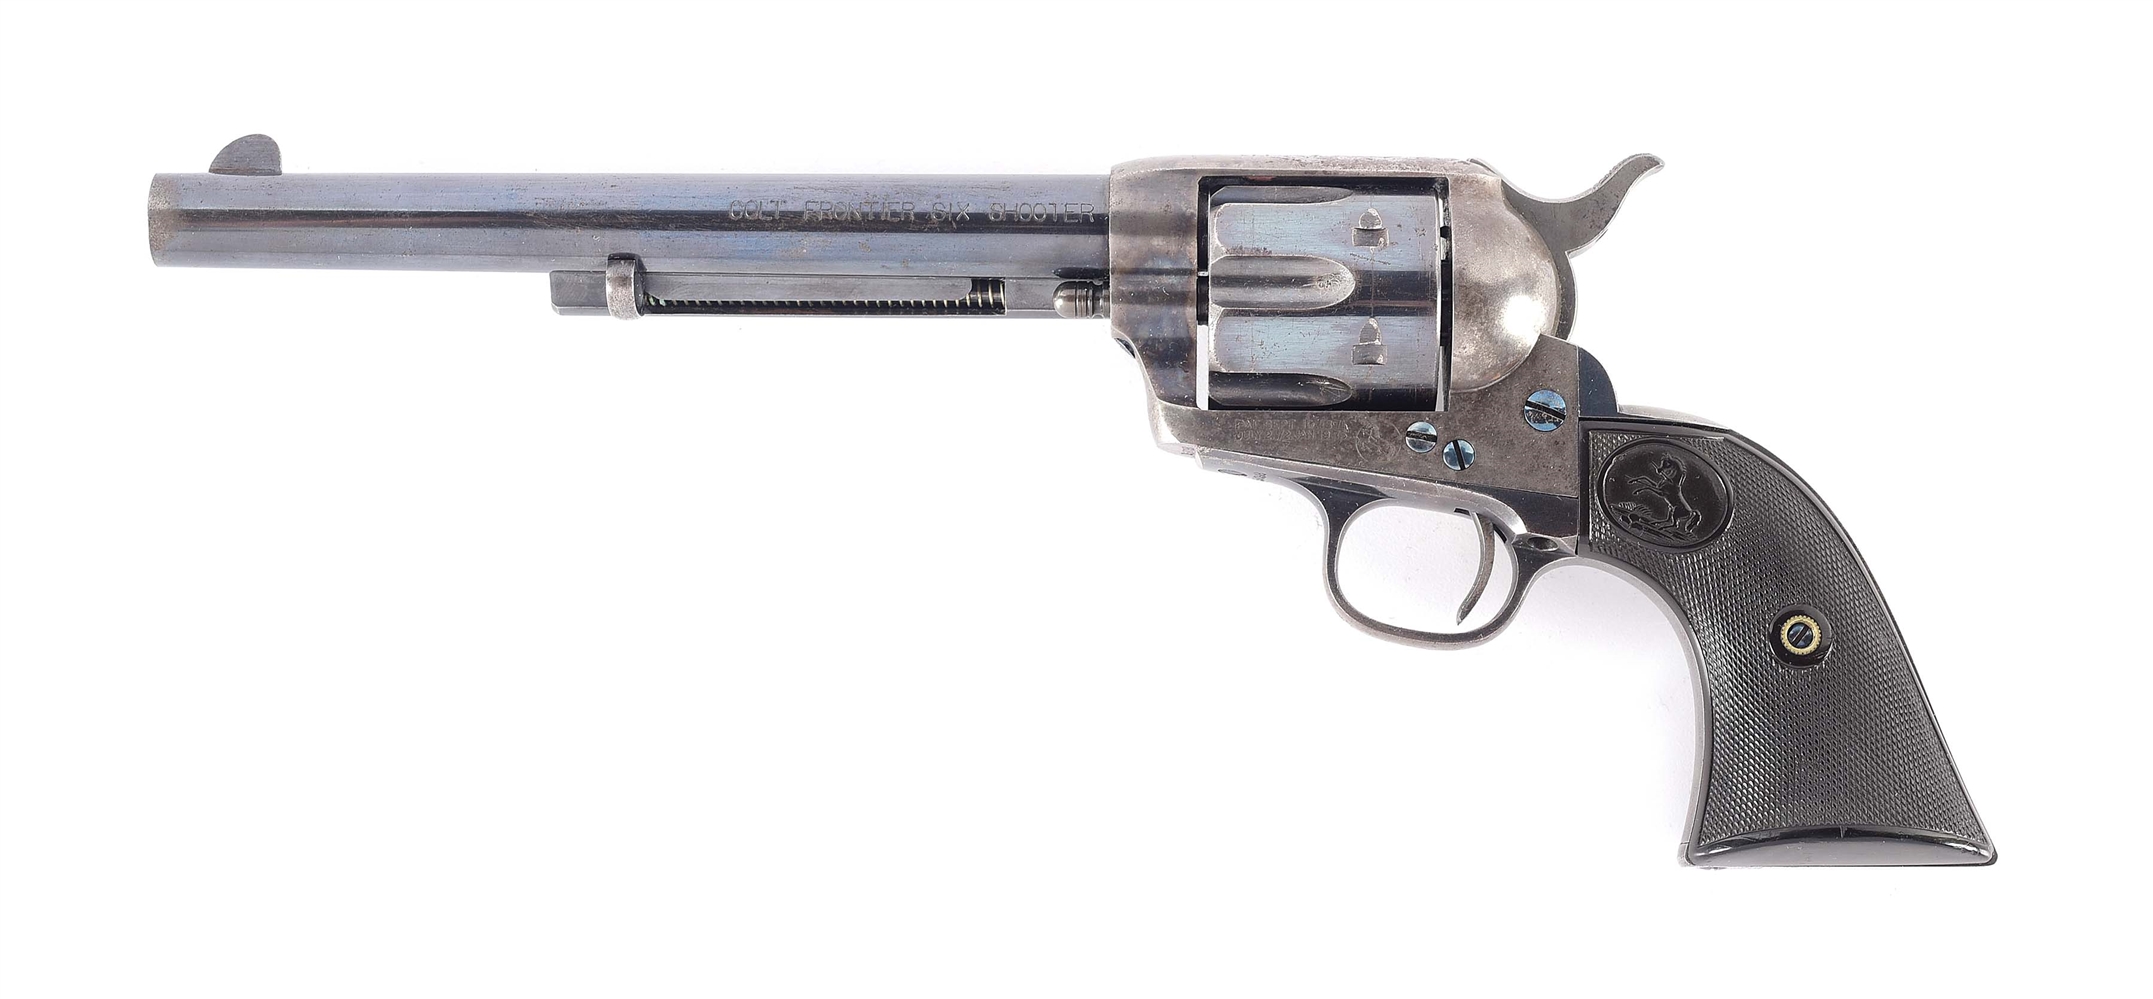 (A) LONDON SHIPPED COLT FRONTIER SIX SHOOTER SINGLE ACTION REVOLVER.